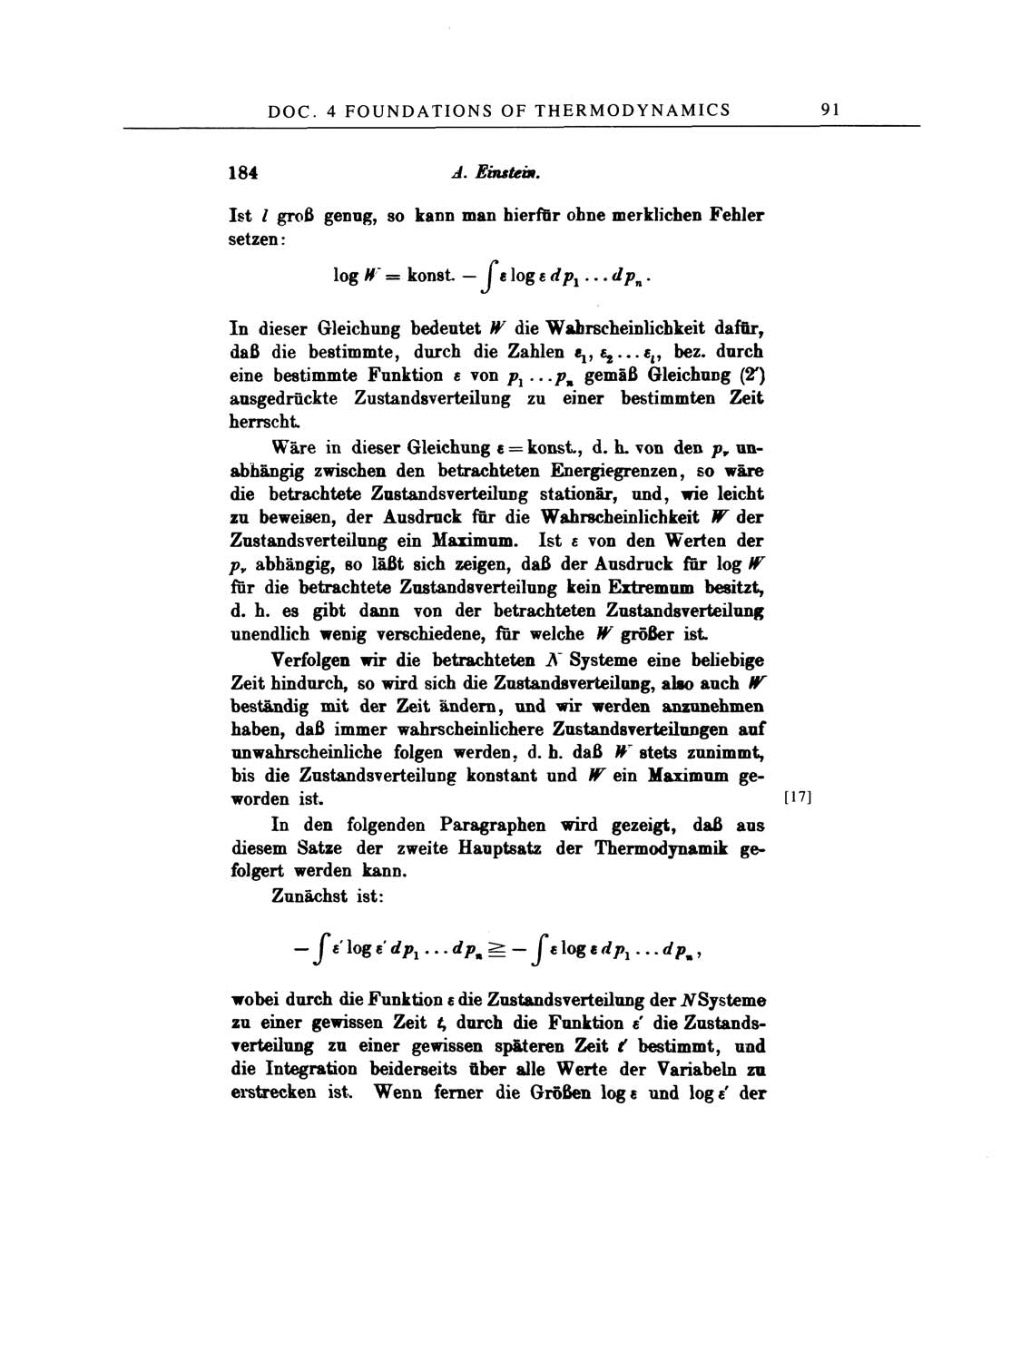 Volume 2: The Swiss Years: Writings, 1900-1909 page 91